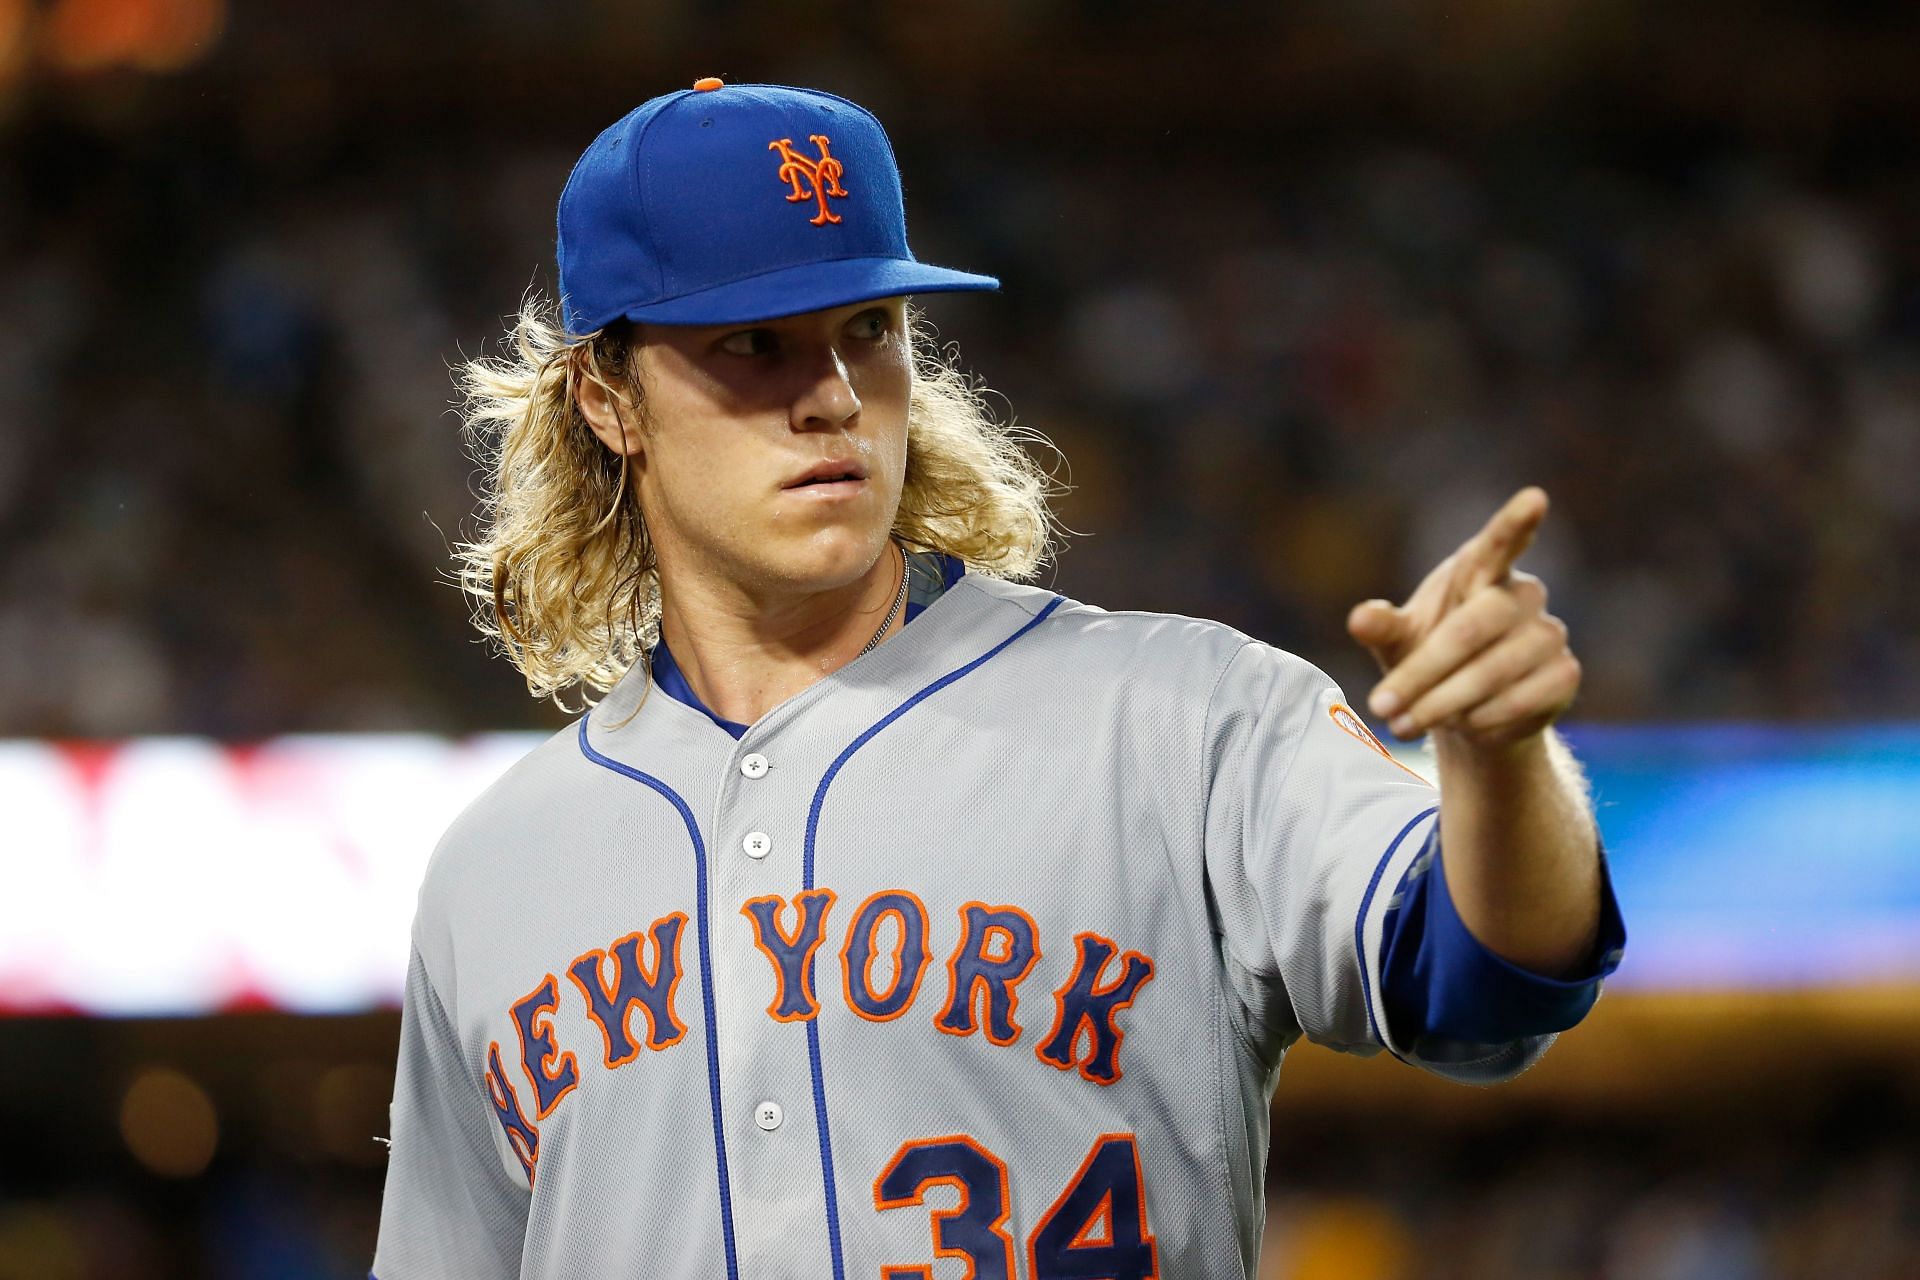 “Mr. Met is a creep” - Noah Syndergaard continues his Twitter barrage  against the New York Mets by firing shots at mascot